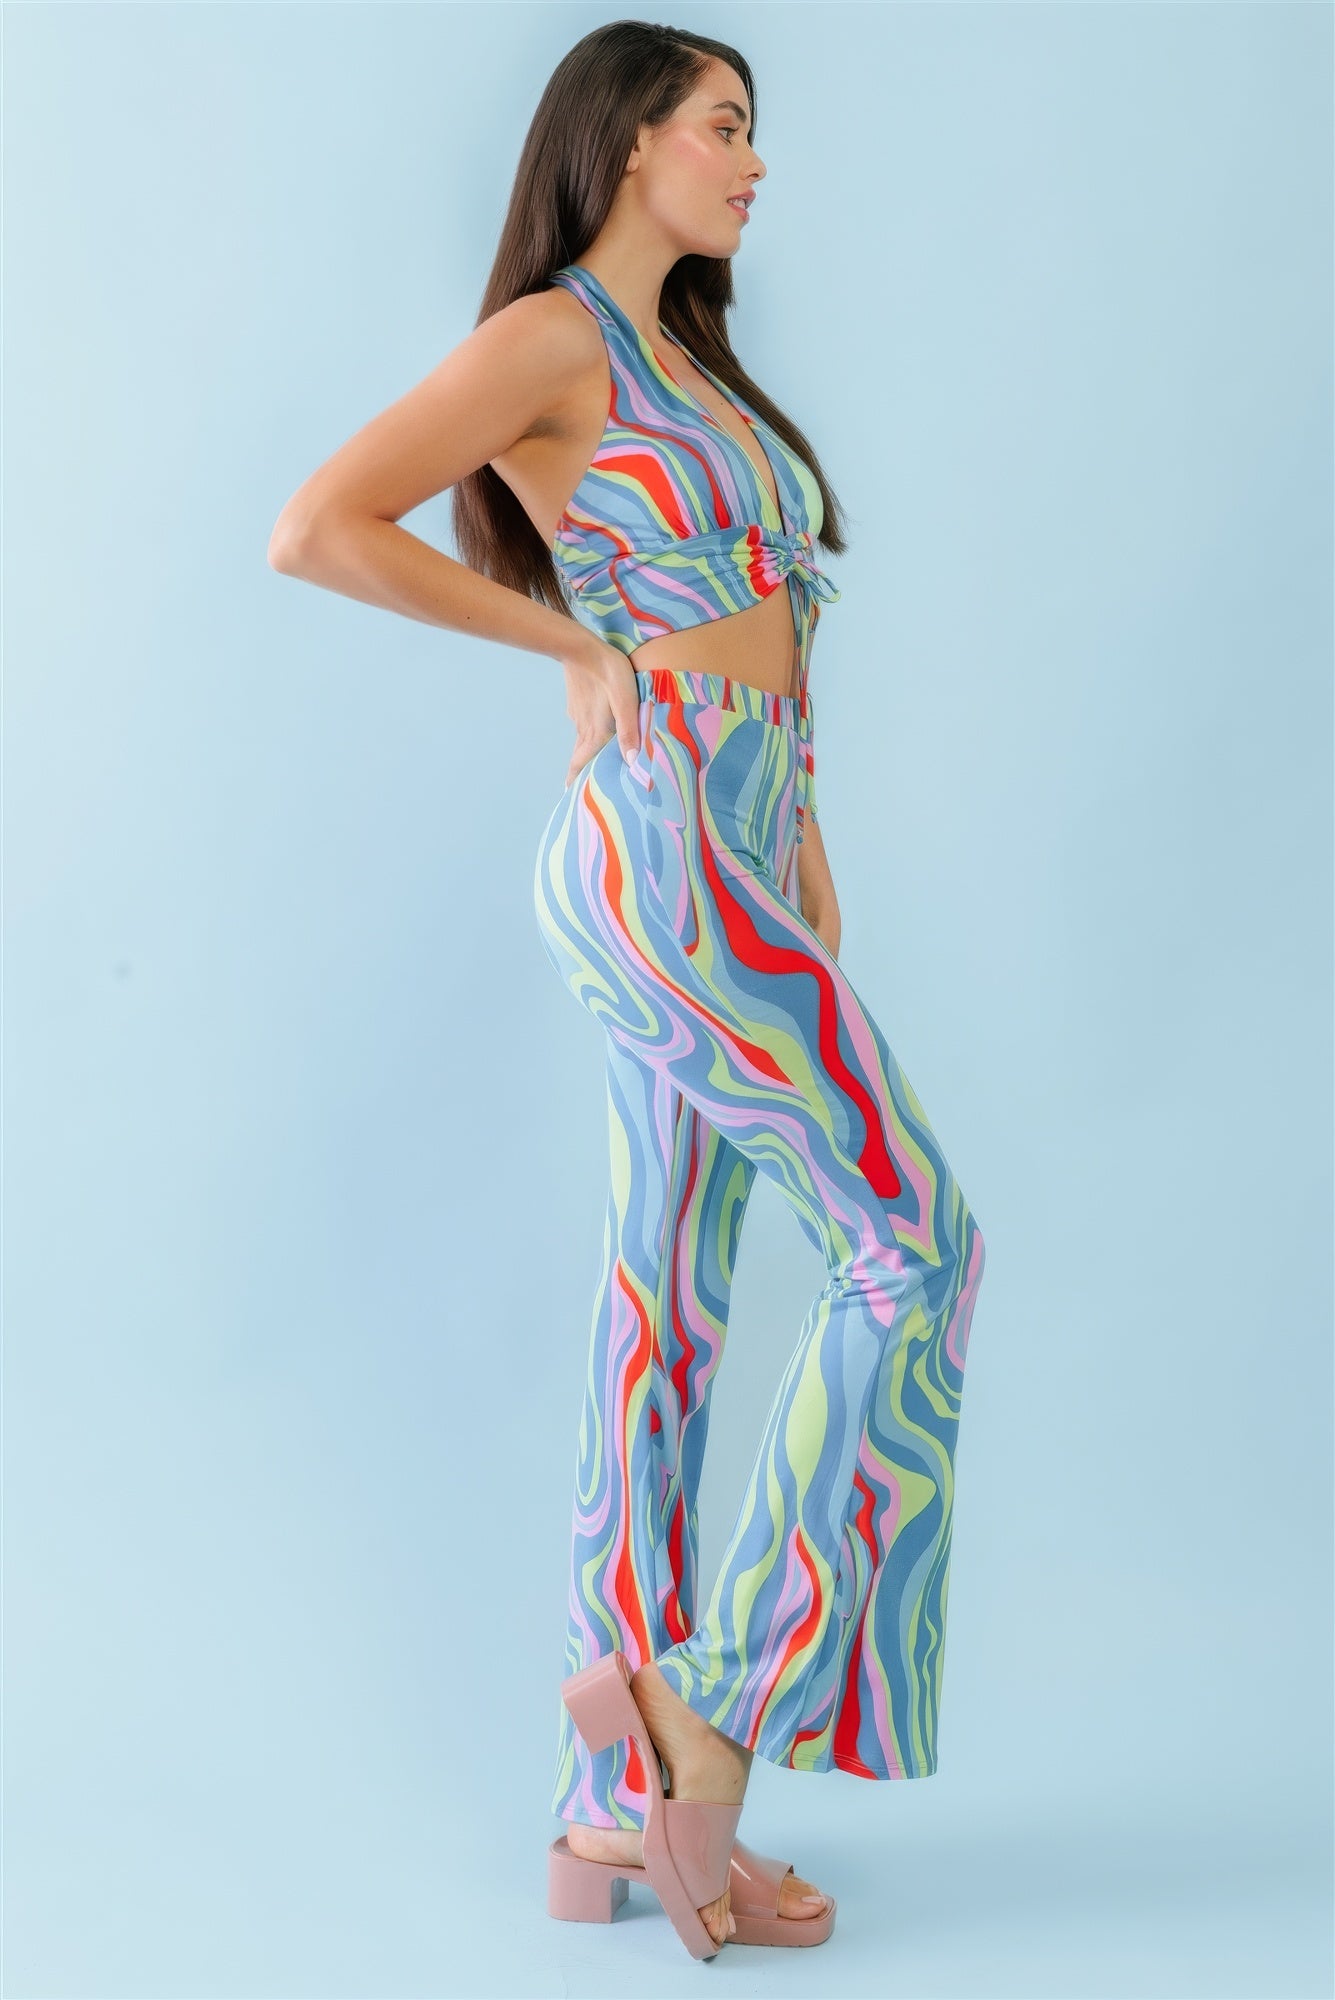 THE SAMI Multicolor Abstract Print Halter V-neck Ruched Open Back Crop Top & High Waist Pants Set